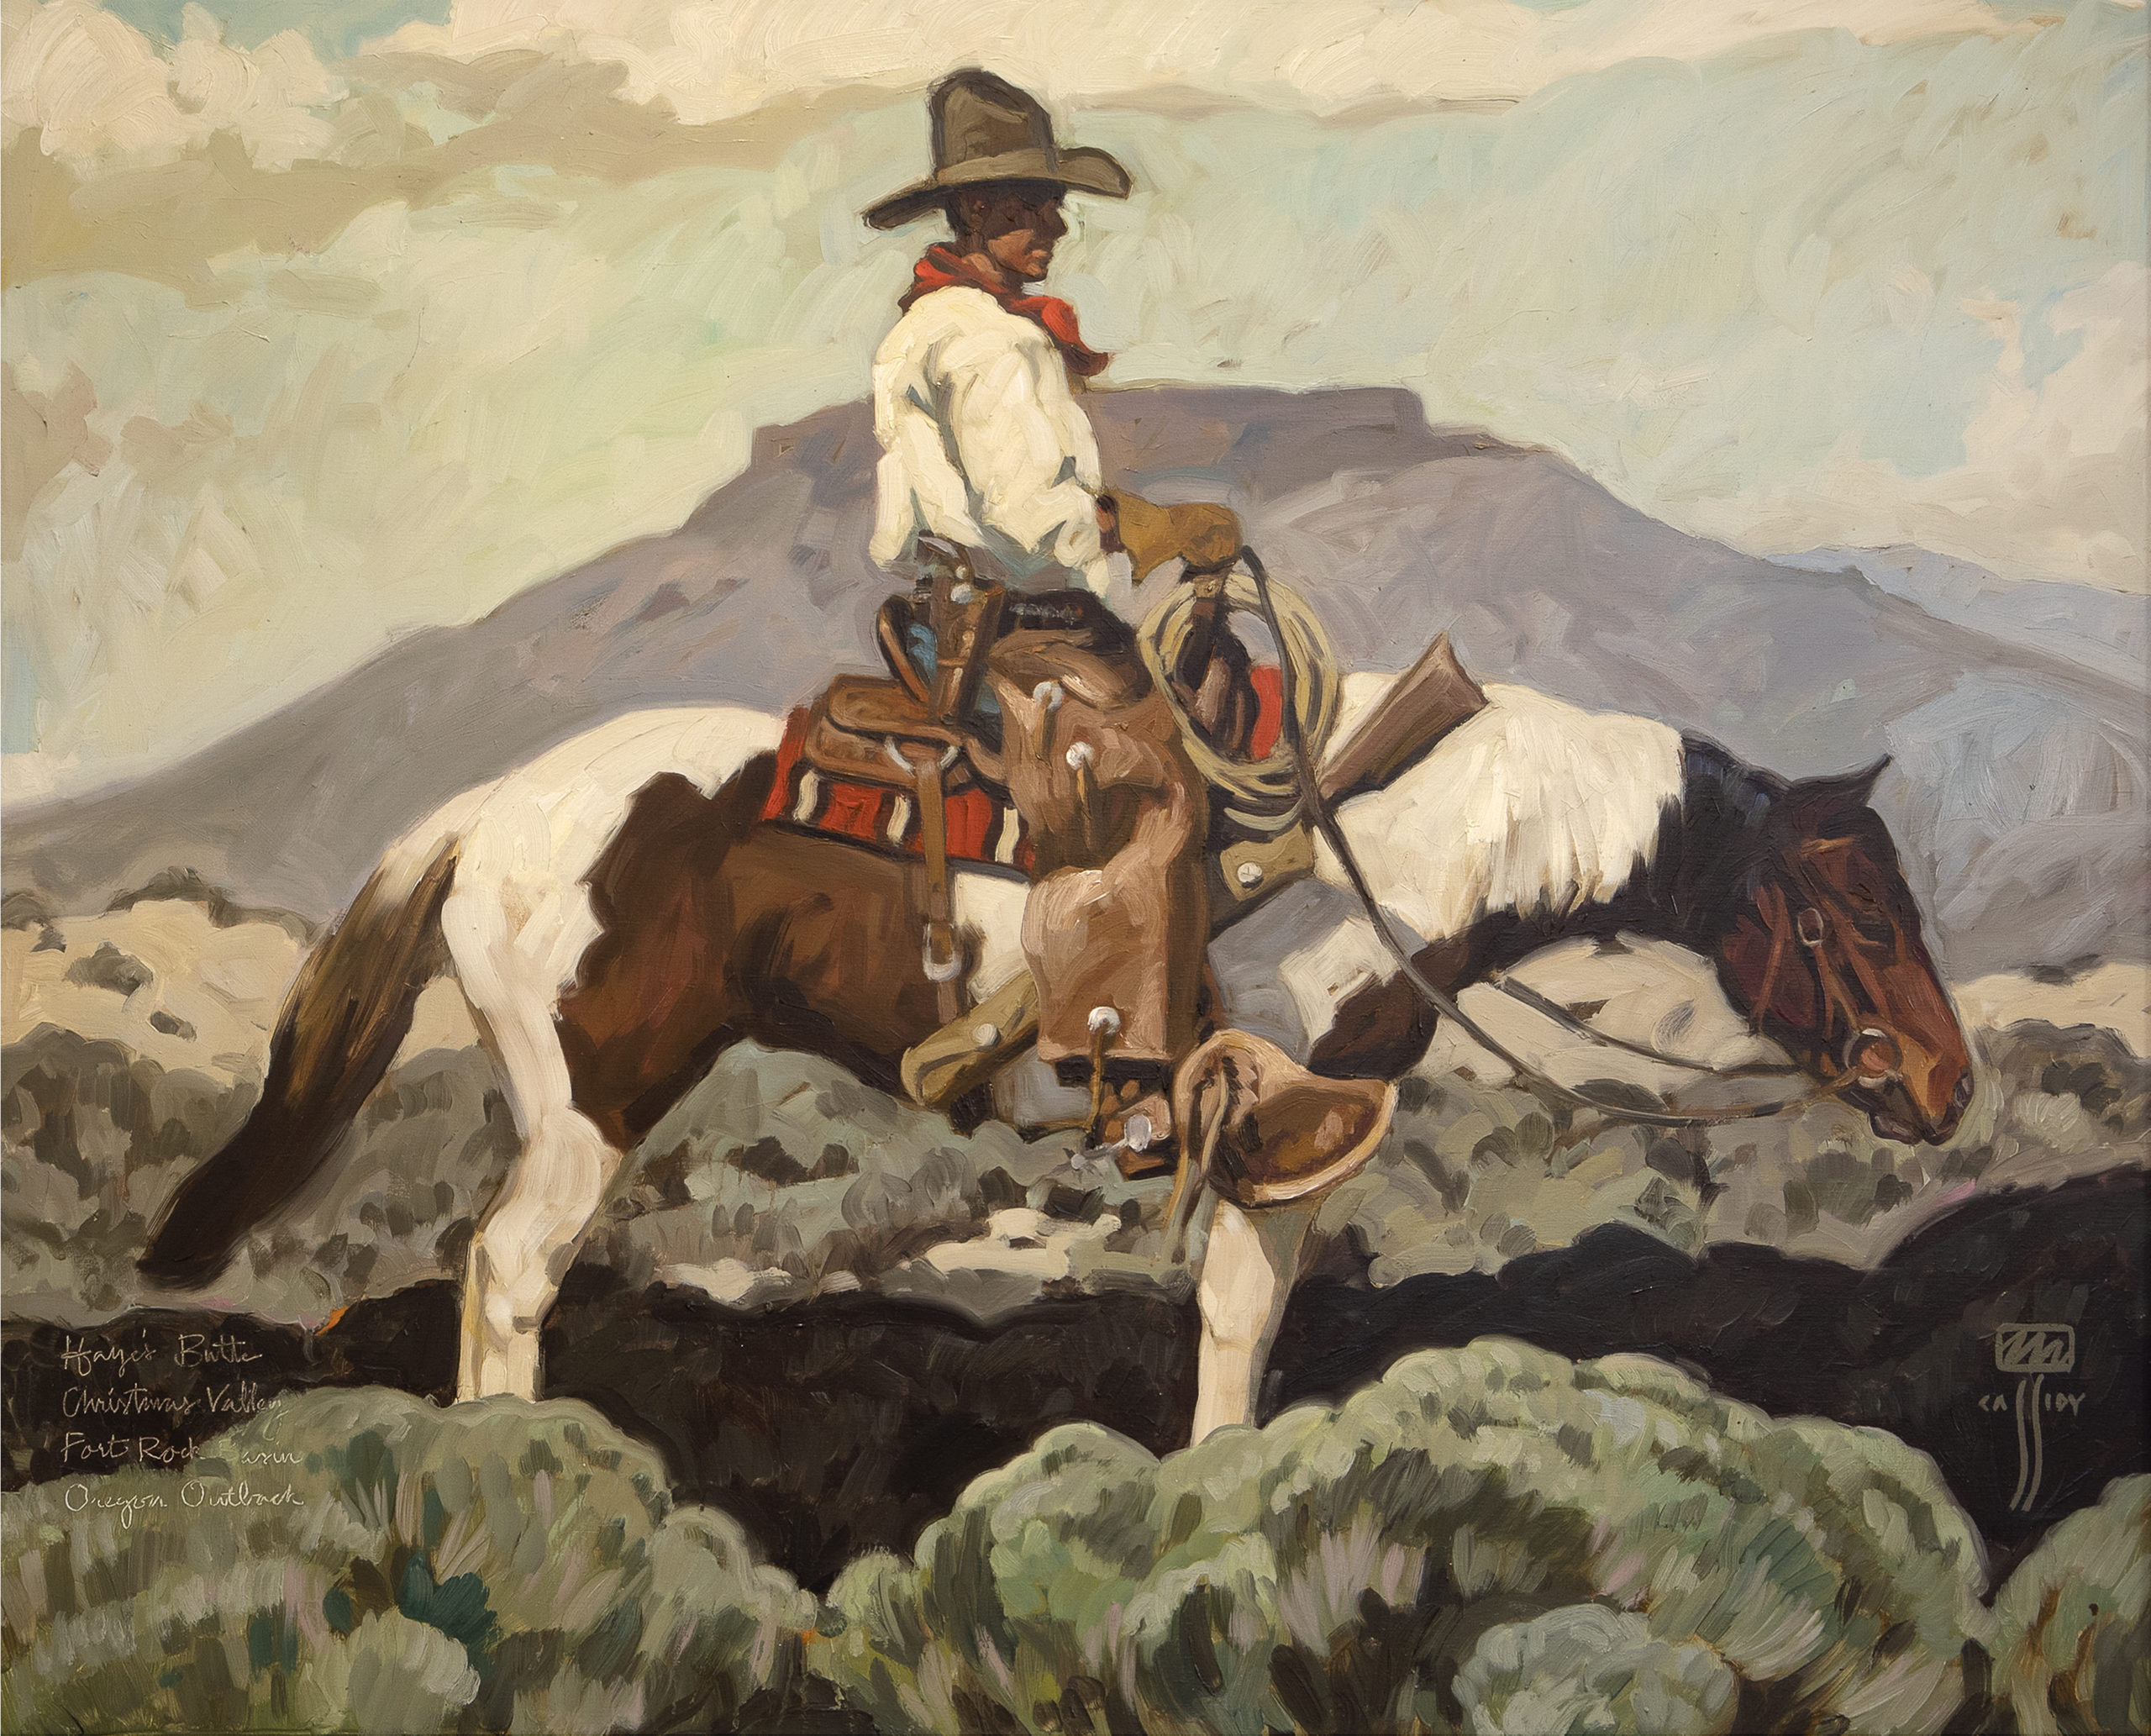 
		                					Michael Cassidy		                																	
																											<i>Oregon Outback ,</i>  
																																								2021, 
																																								oil on linen, 
																																								30 1/4 x 41 1/4 inches 
																								
		                				